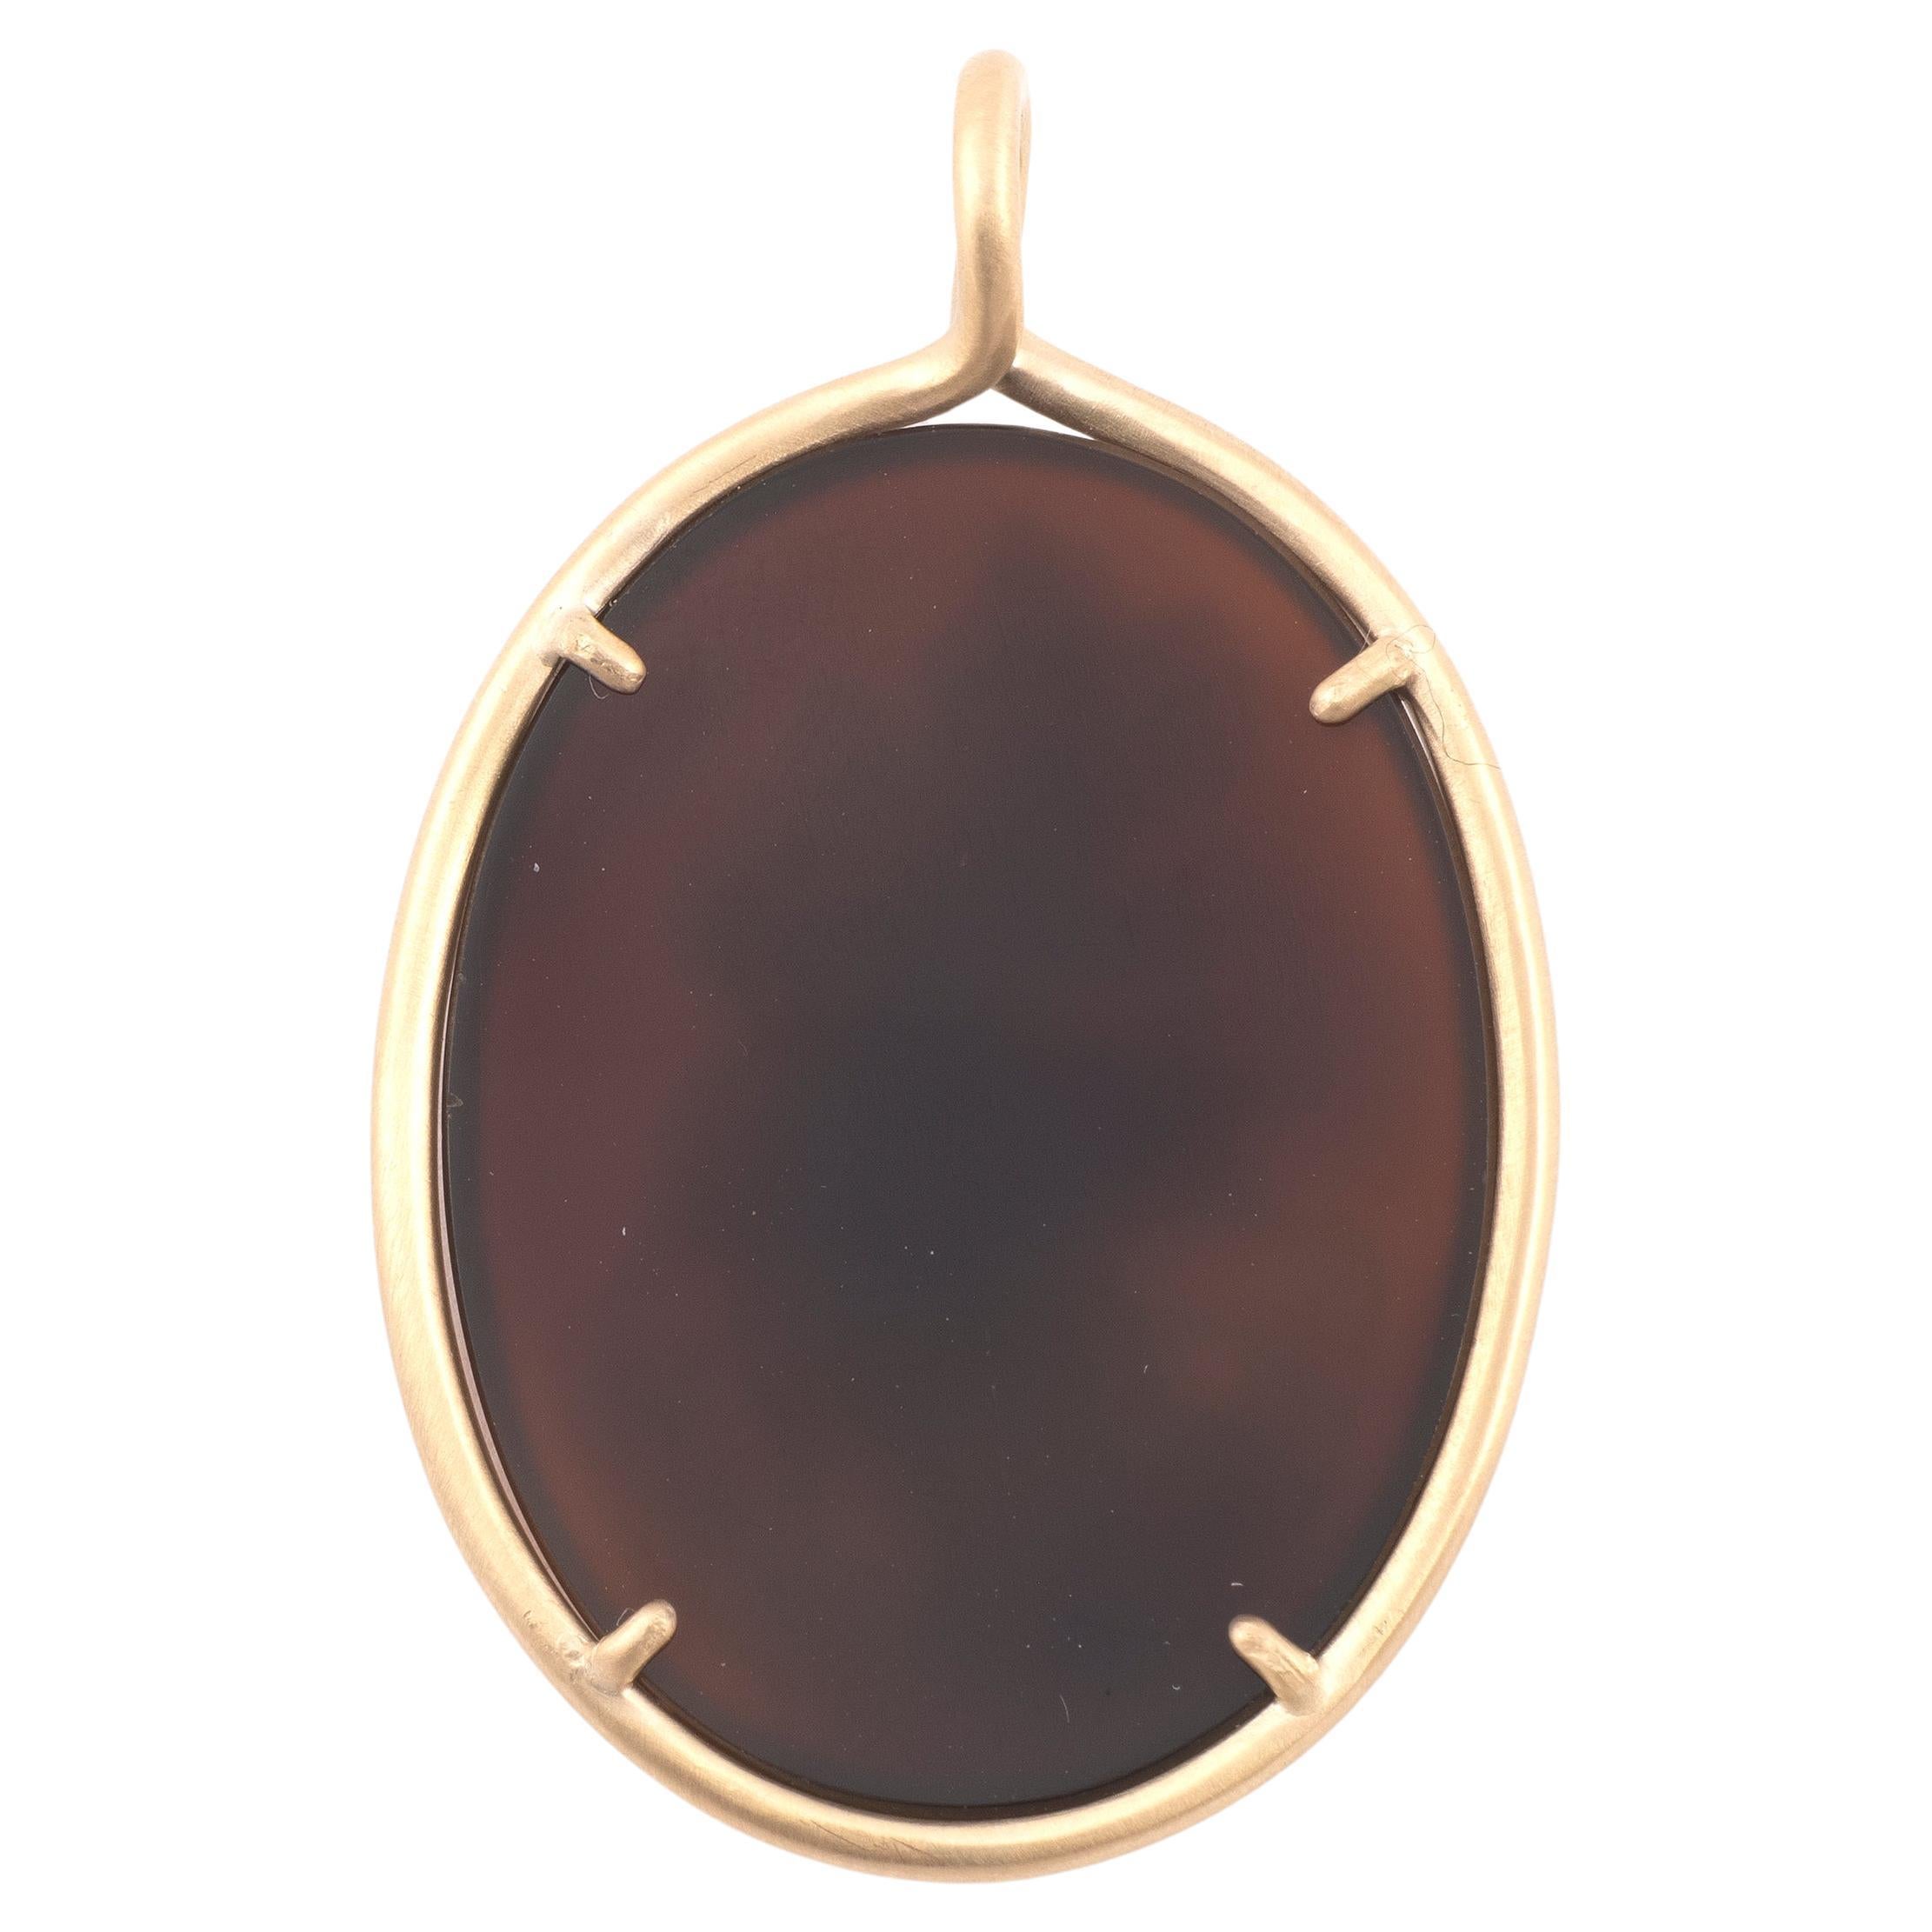 Cameo on agate depicting a woman carrying a jewellery box, her feet on clouds. 18kt yellow gold frame pendant. Size 41mm x 28mm Weight: 6.29gr.